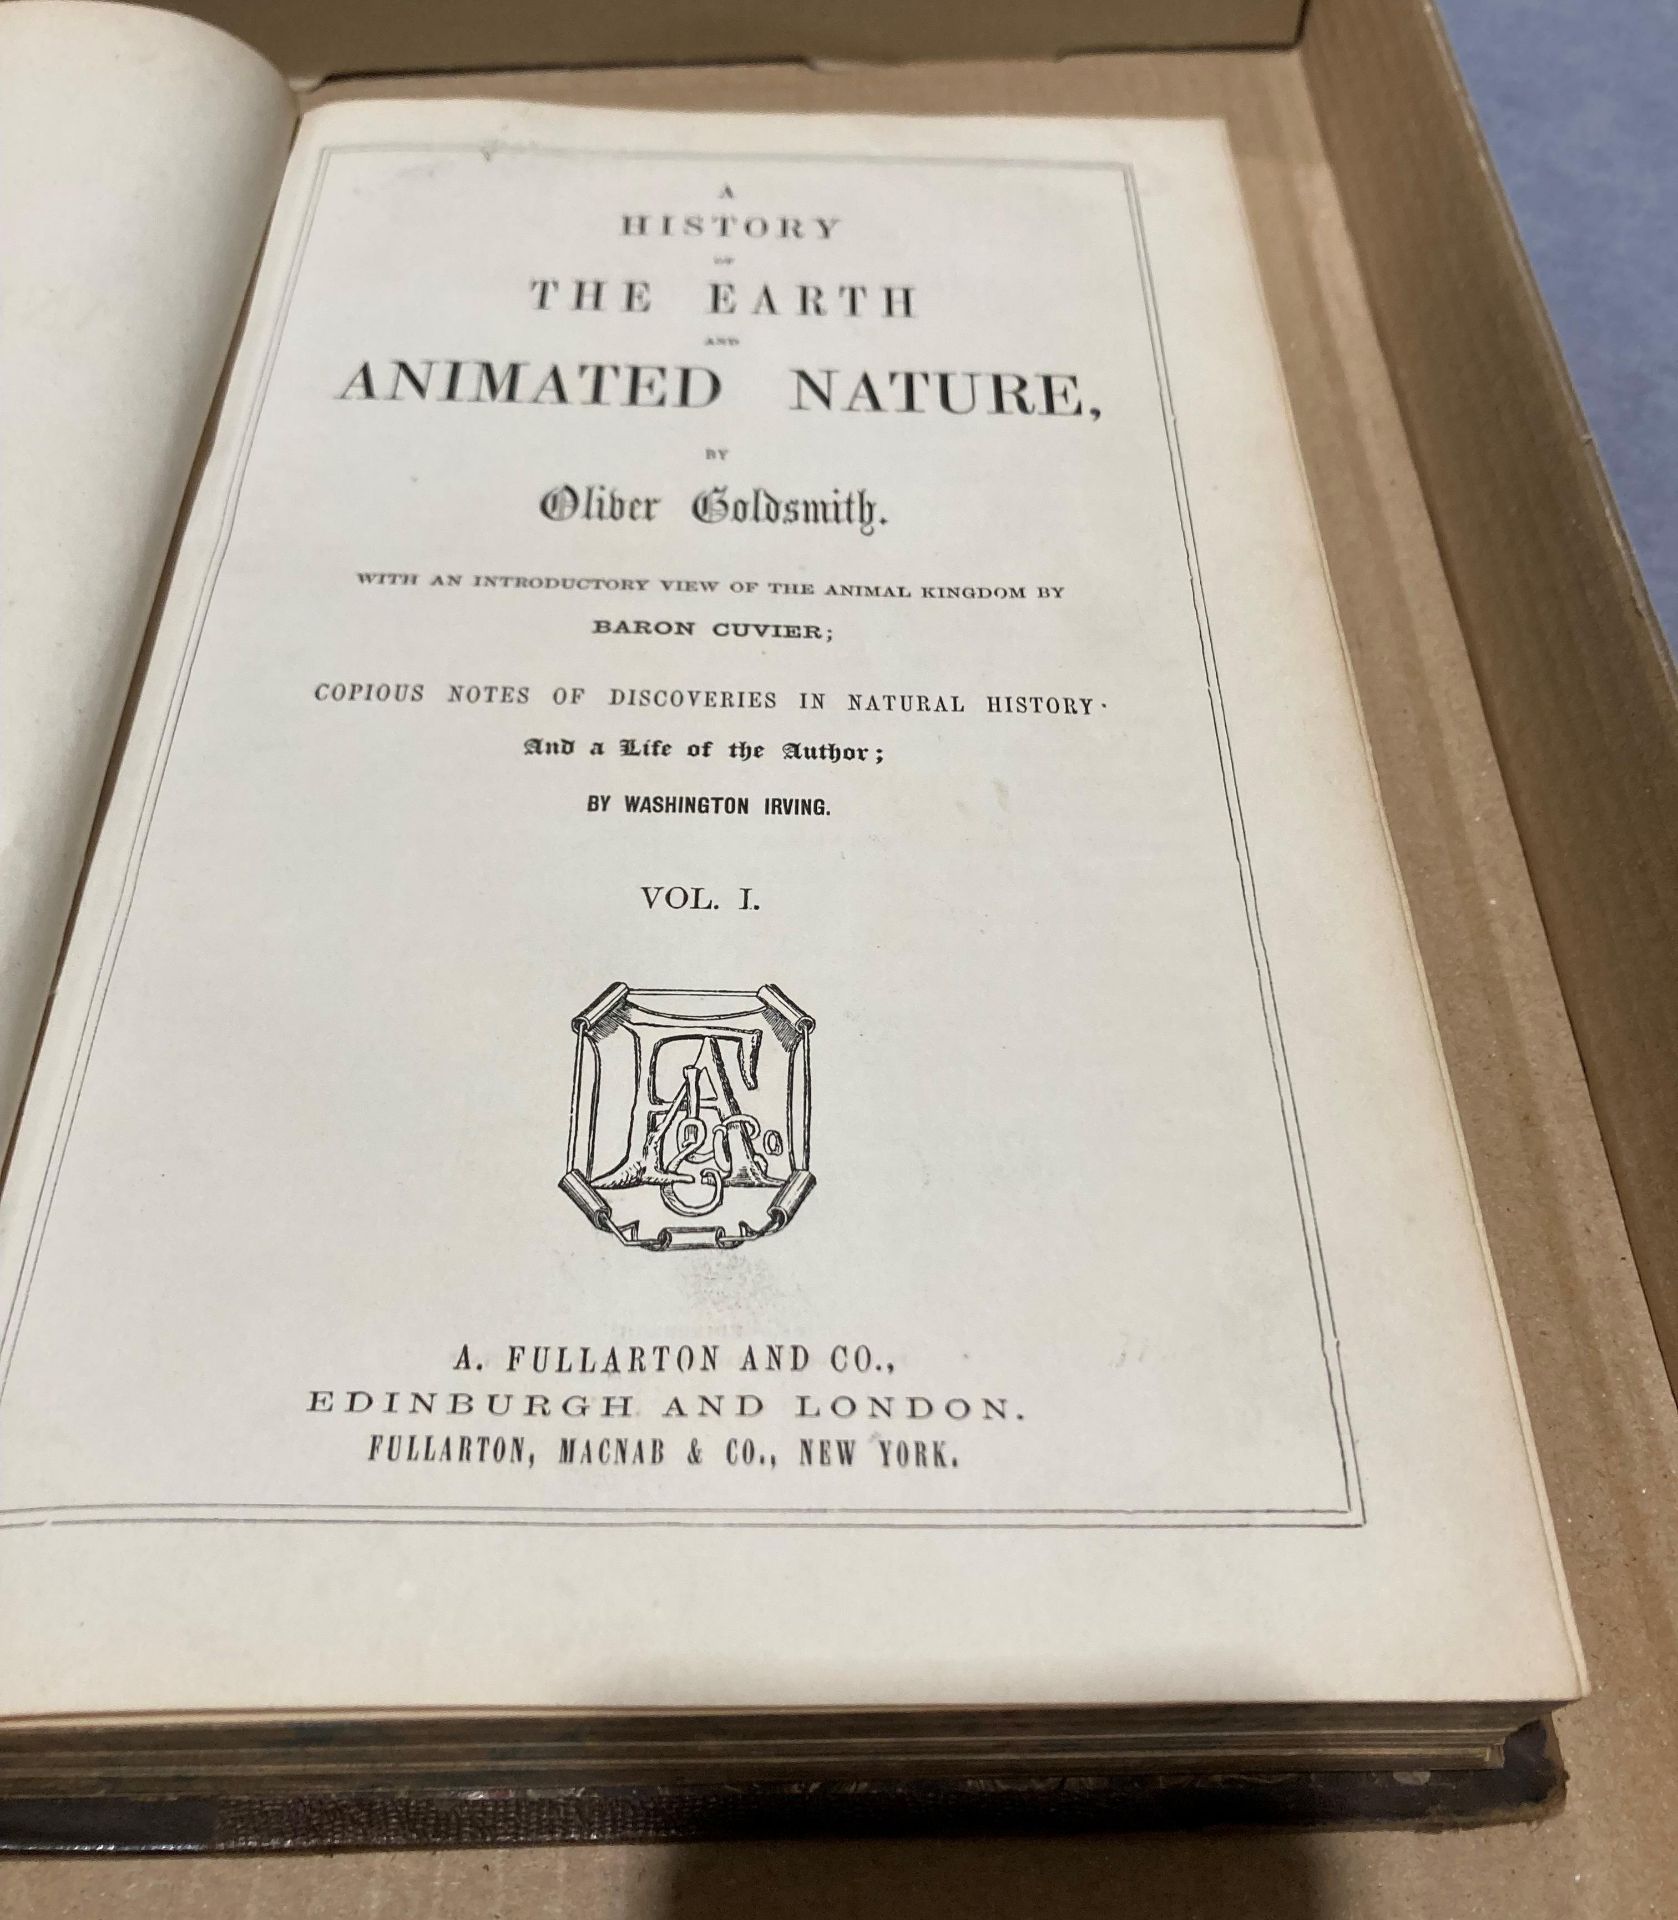 Oliver Goldsmith - two volumes 'A History of the Earth & Animated Nature' published by A Fullarton - Image 3 of 6